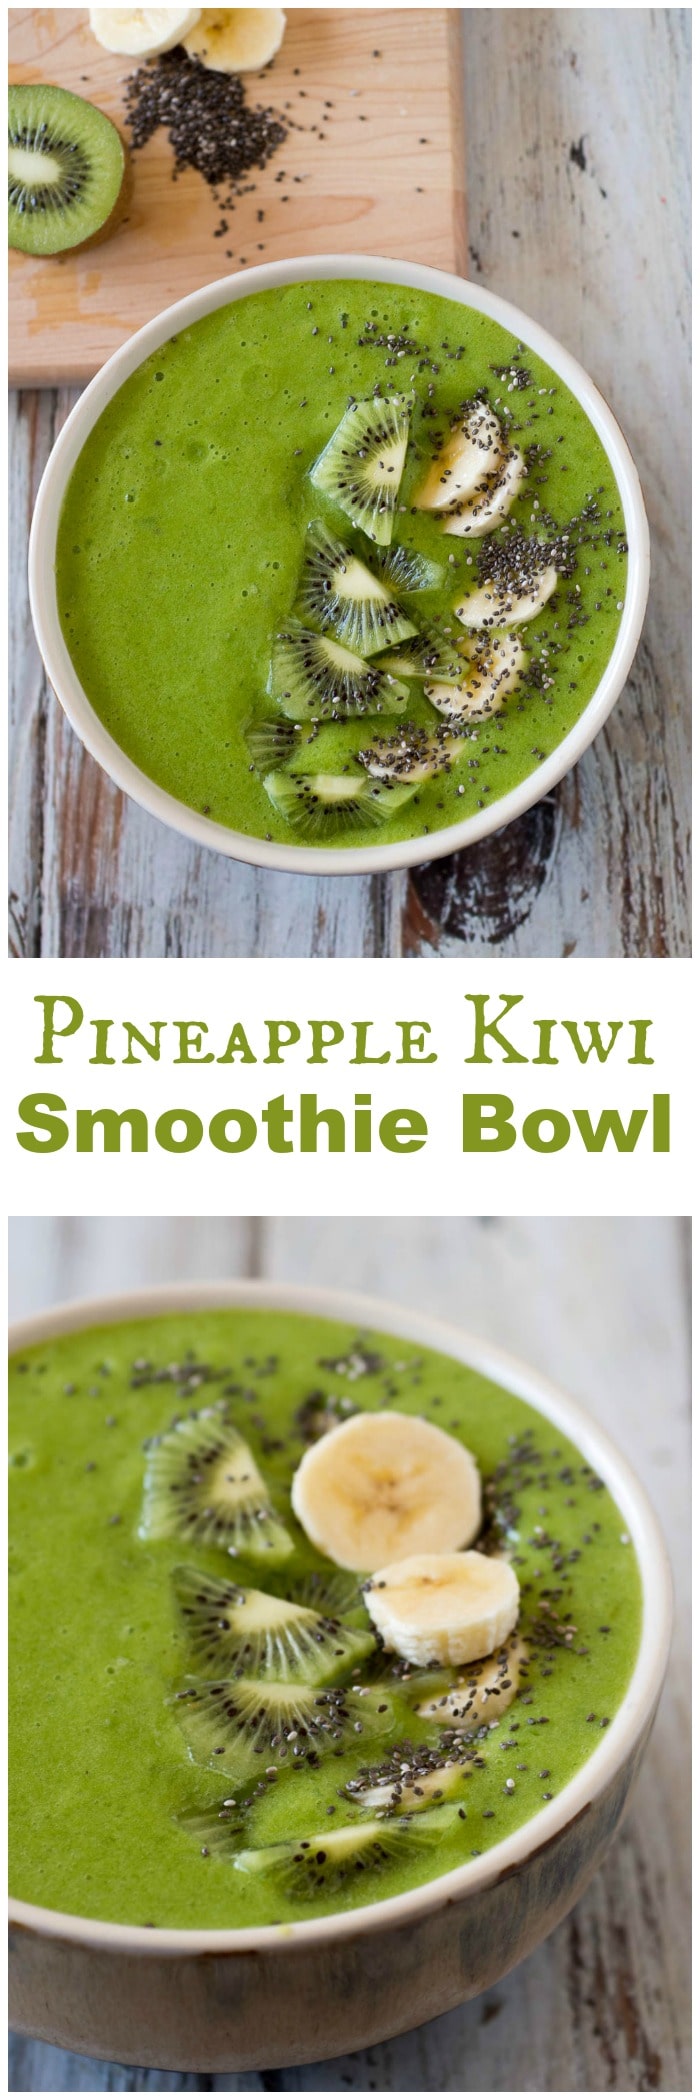 This tropical Pineapple Kiwi Smoothie bowl makes a delicious healthy meal. A green smoothie bowl topped off with Kiwi, banana and chia seeds